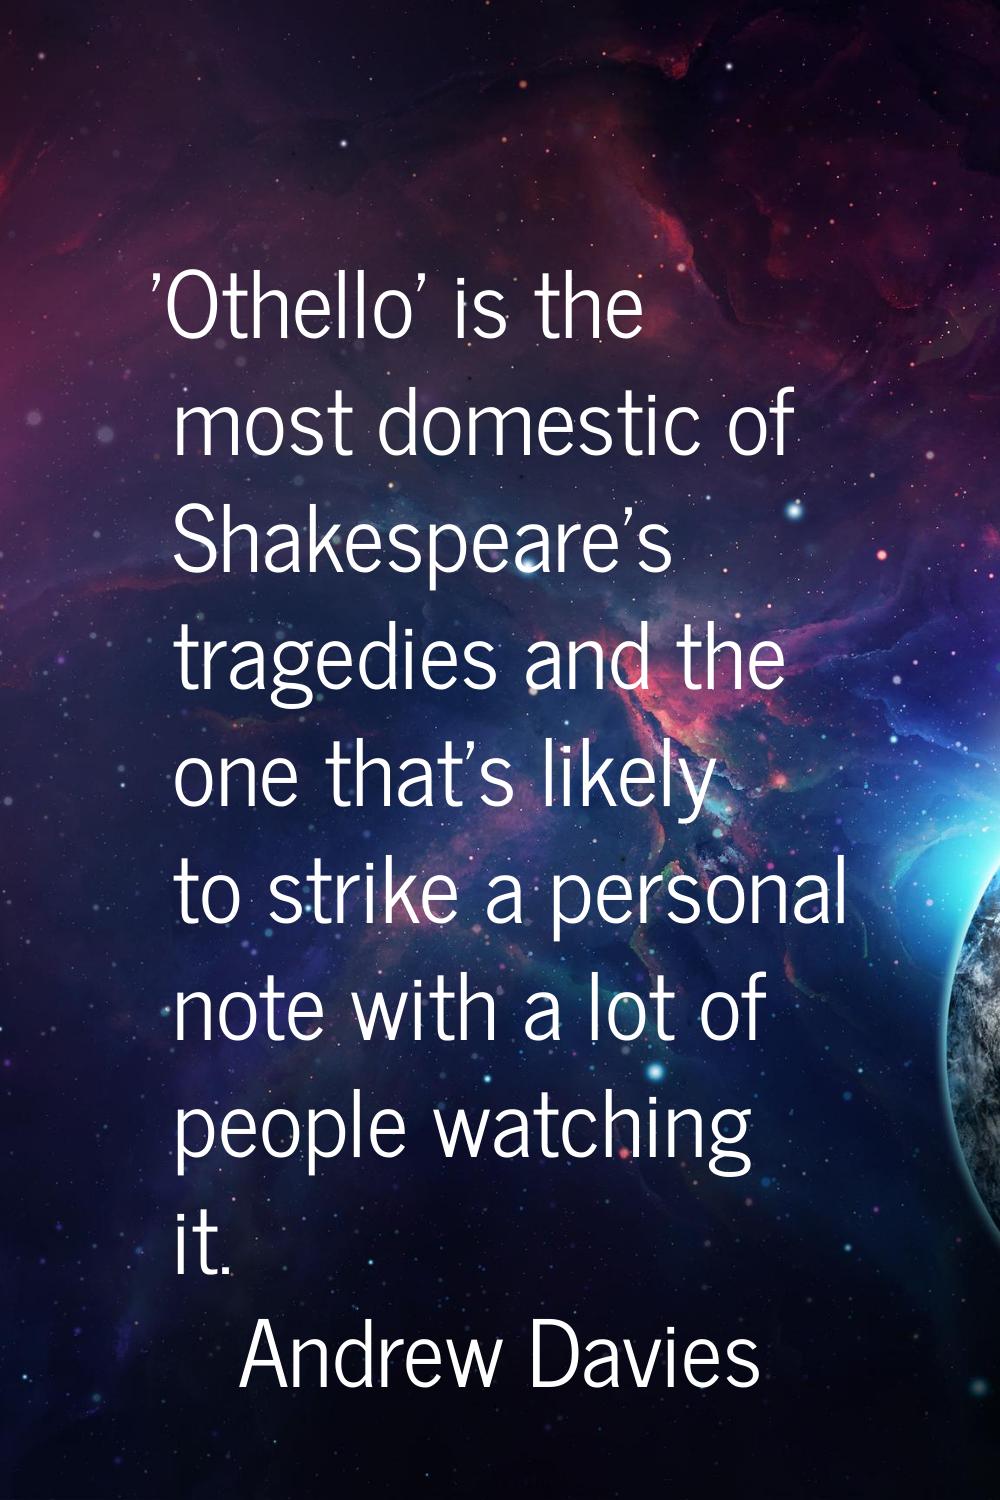 'Othello' is the most domestic of Shakespeare's tragedies and the one that's likely to strike a per